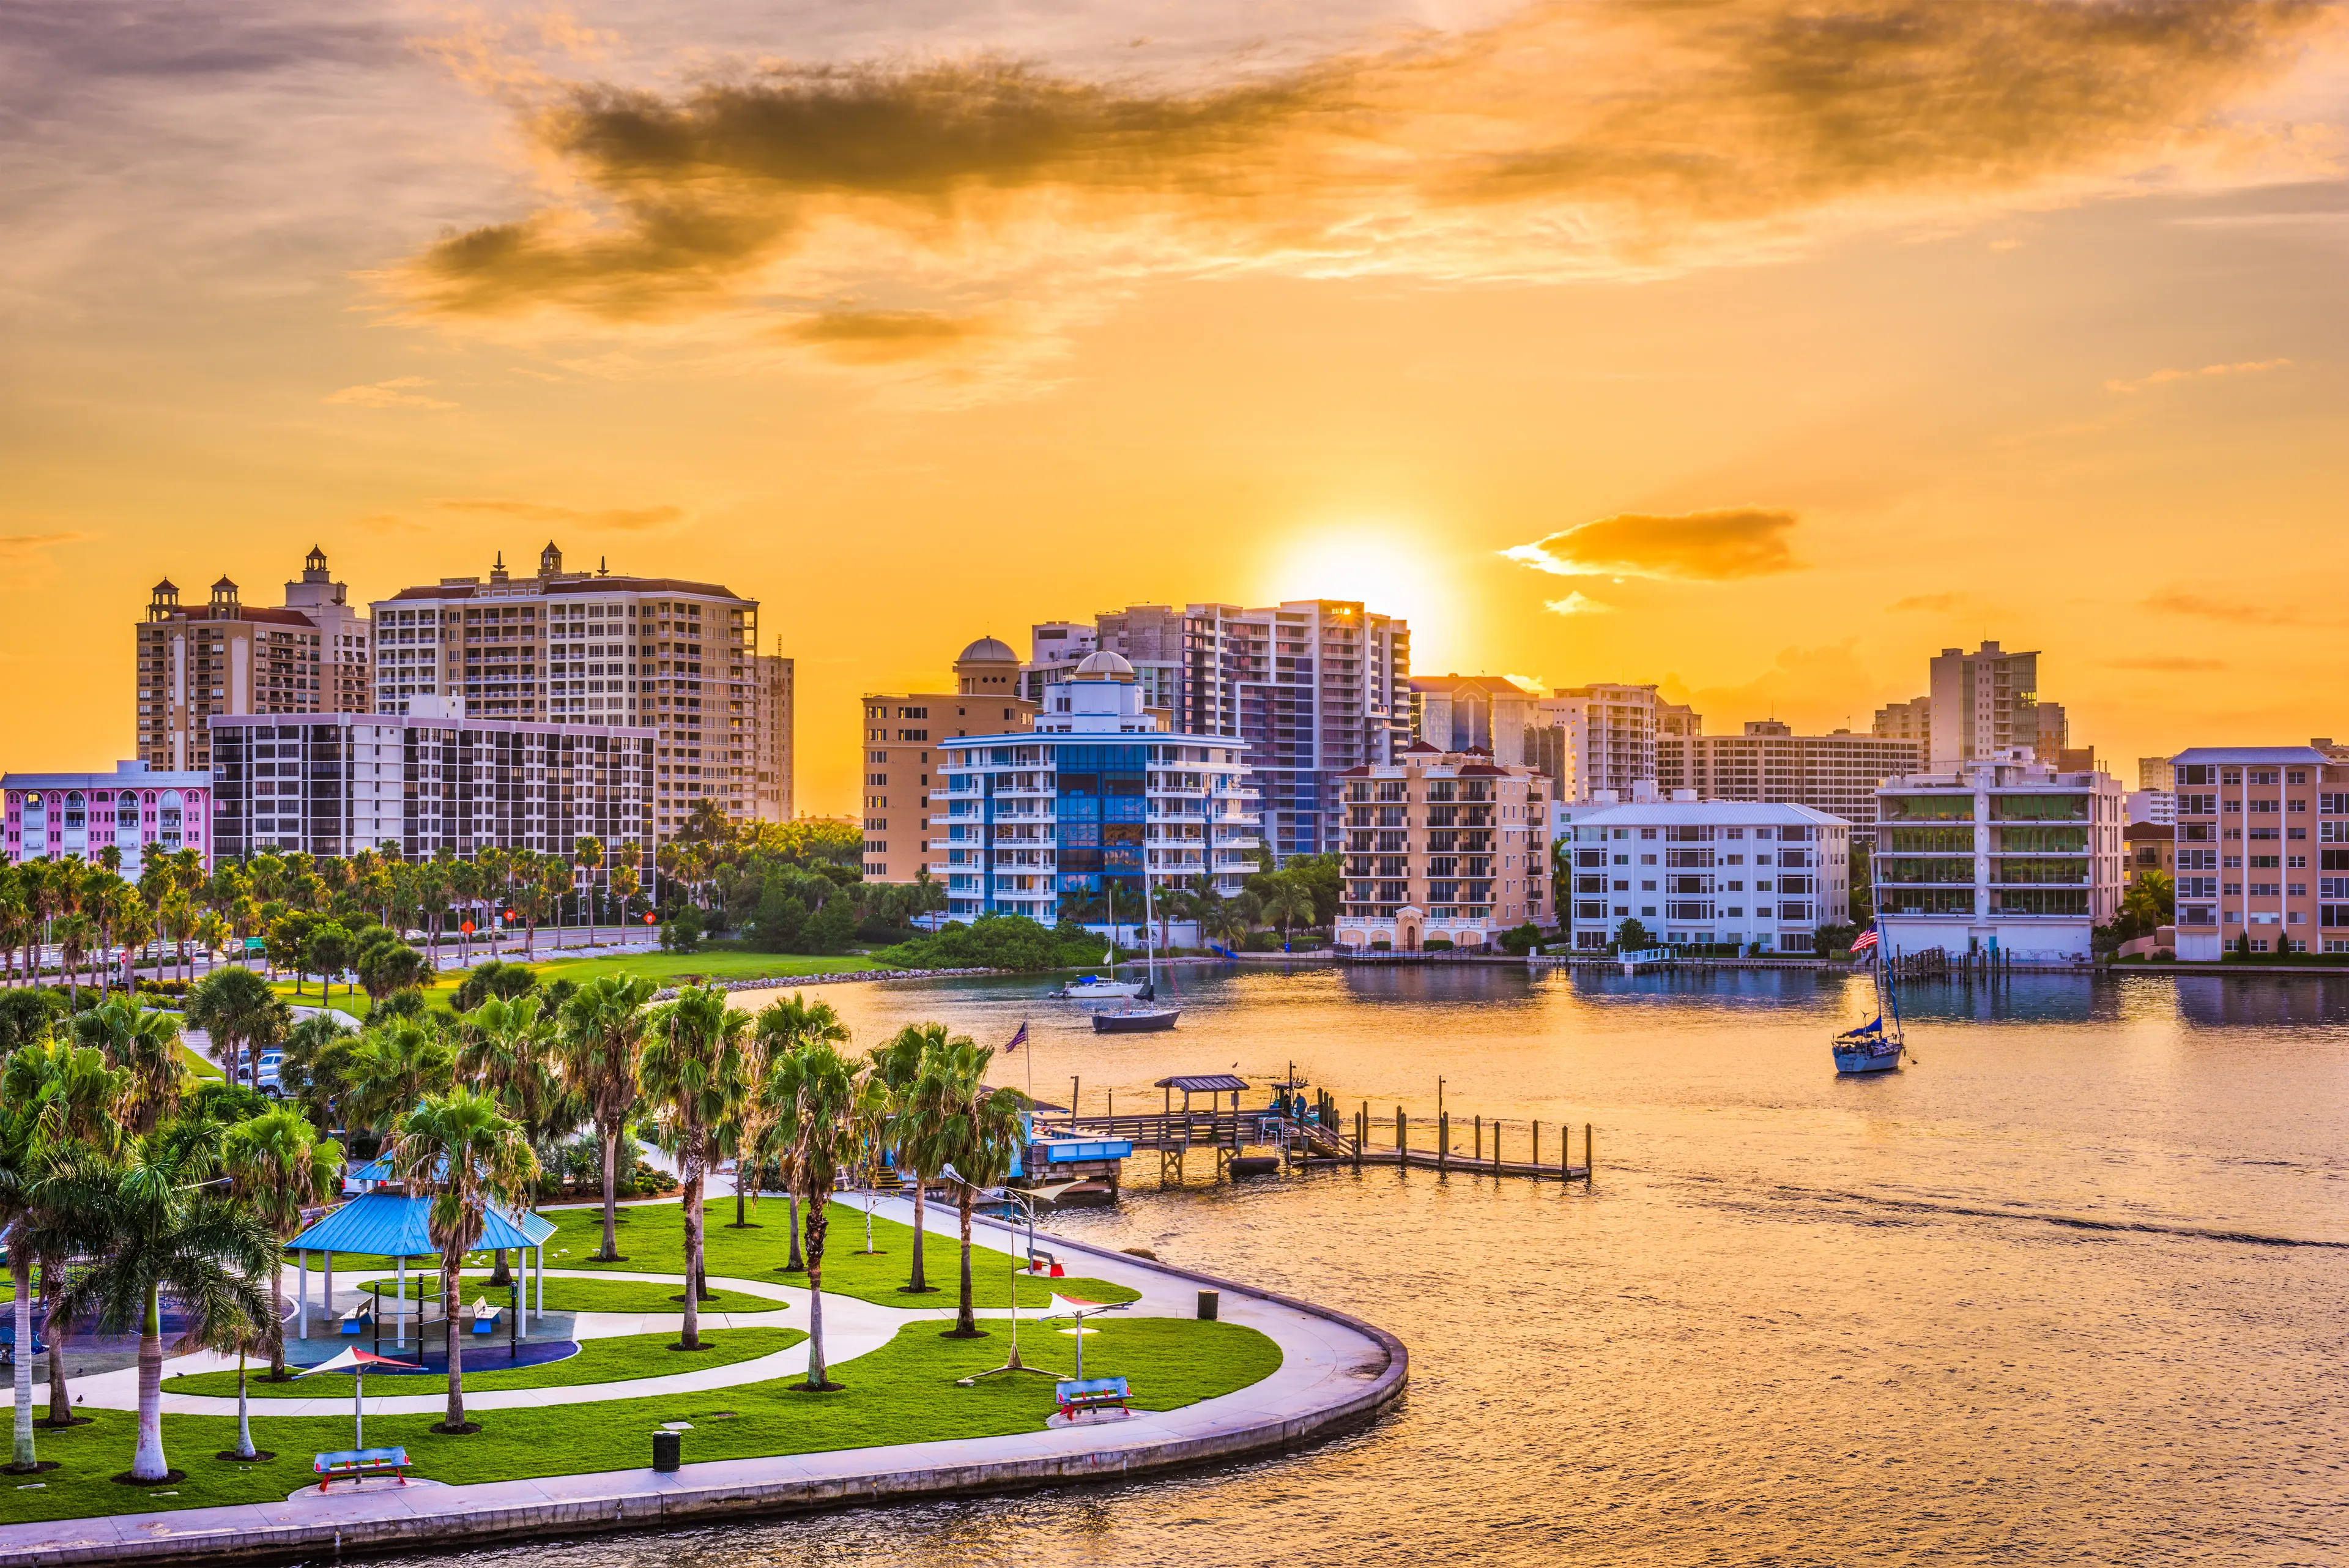 6-Day Exciting Adventure Itinerary to Sunny Florida